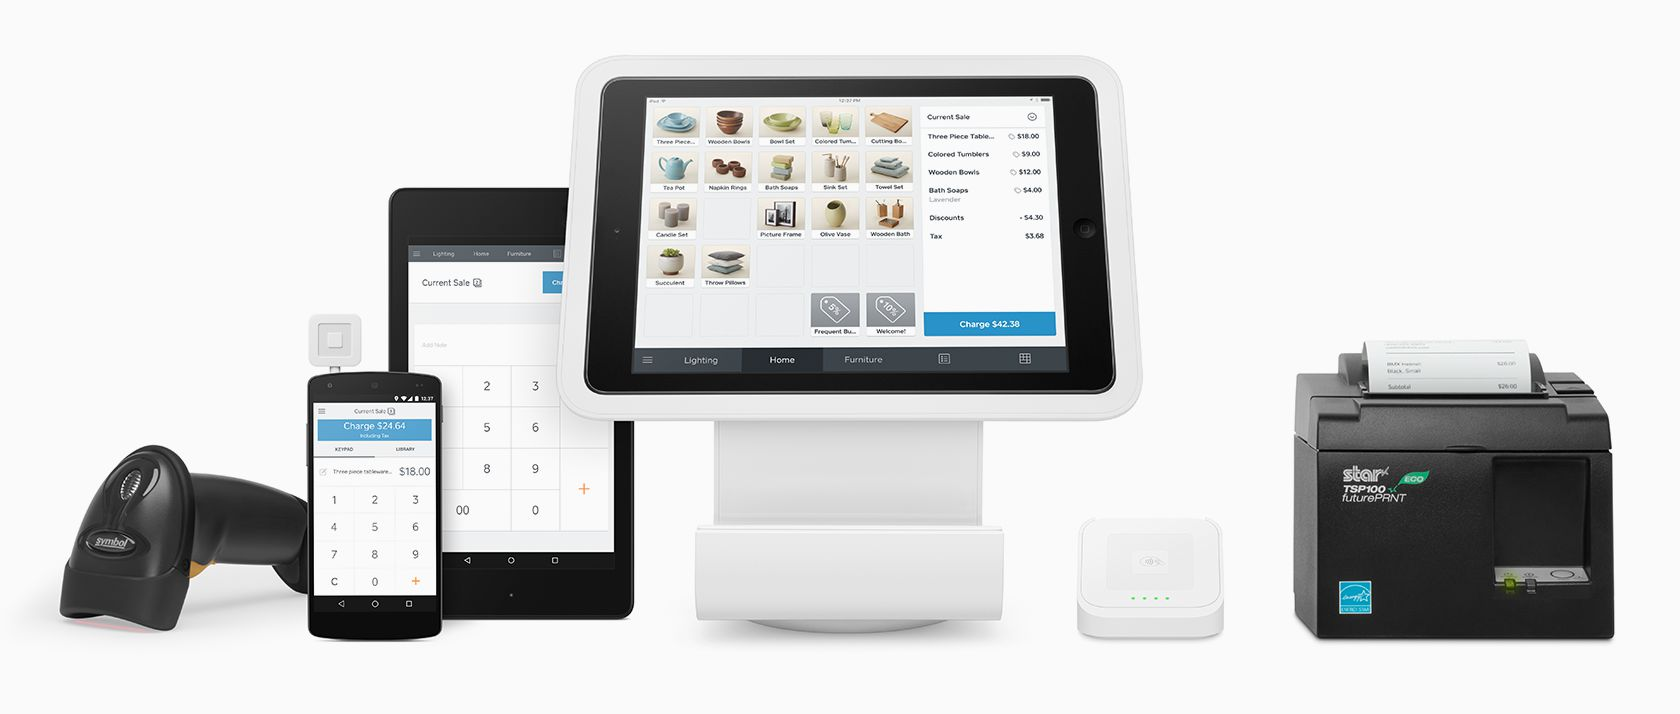 Hotel POS Systems: Types, Features, Integrations | AltexSoft